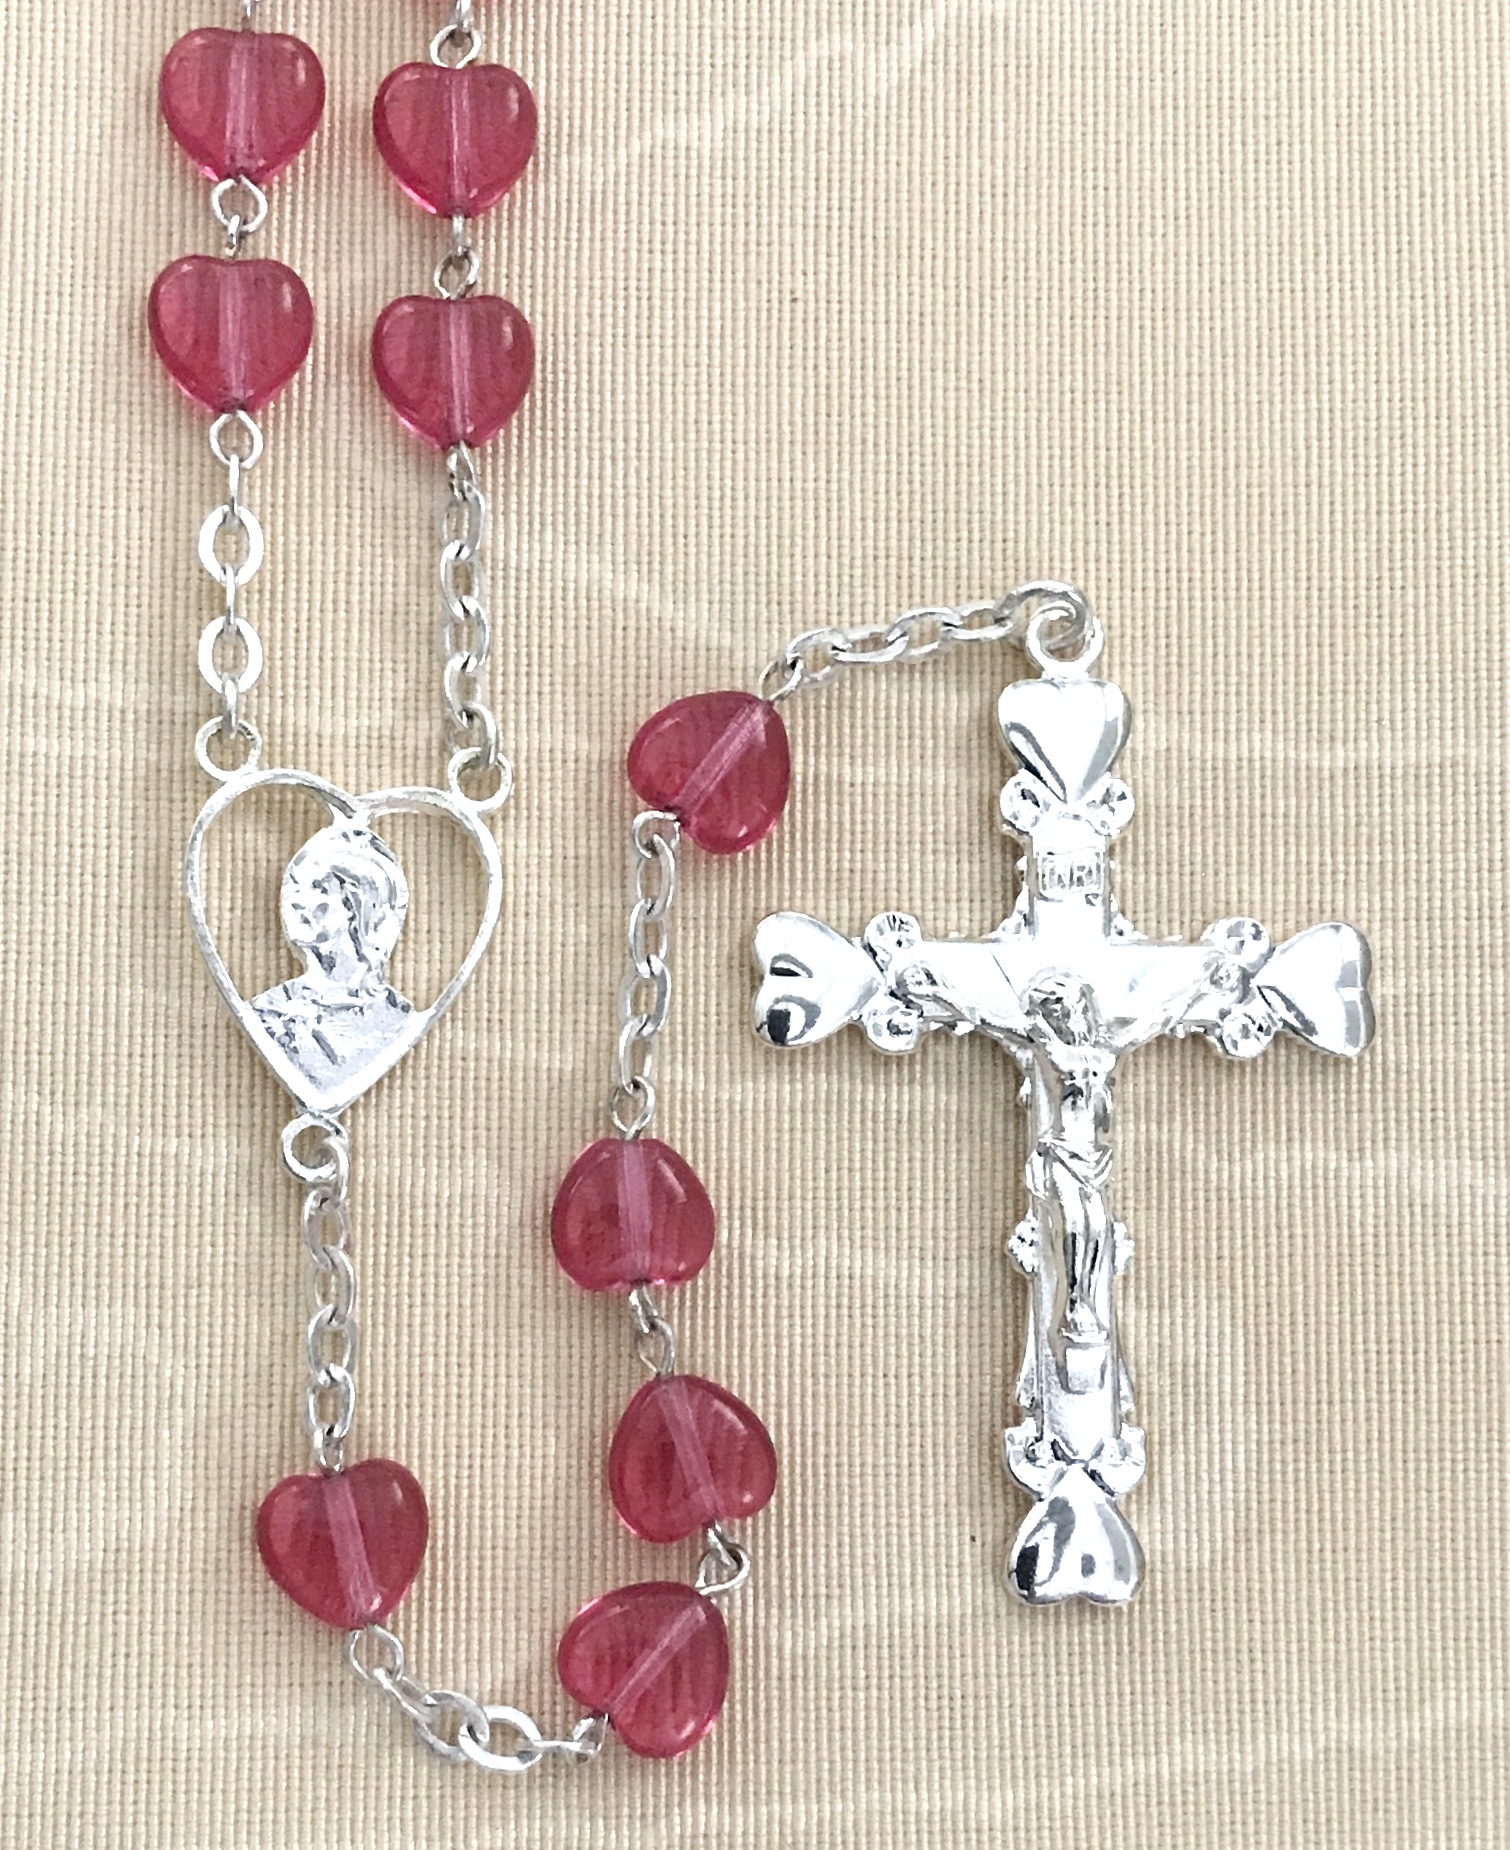 7mm ROSE HEART SHAPED ROSARY WITH STERLING SILVER PLATED CRUCIFIX AND CENTER GIFT BOXED